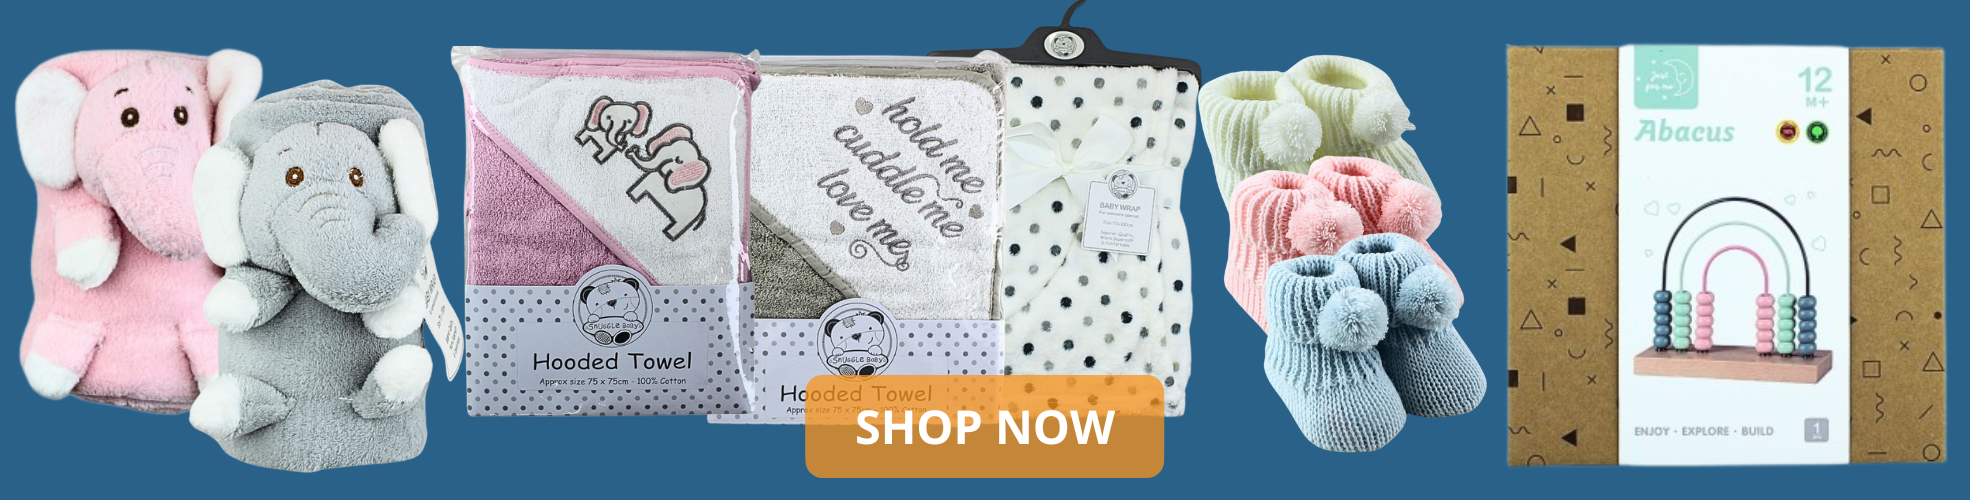 Explore our new range of baby products and nursery essentials at wholesale prices. 